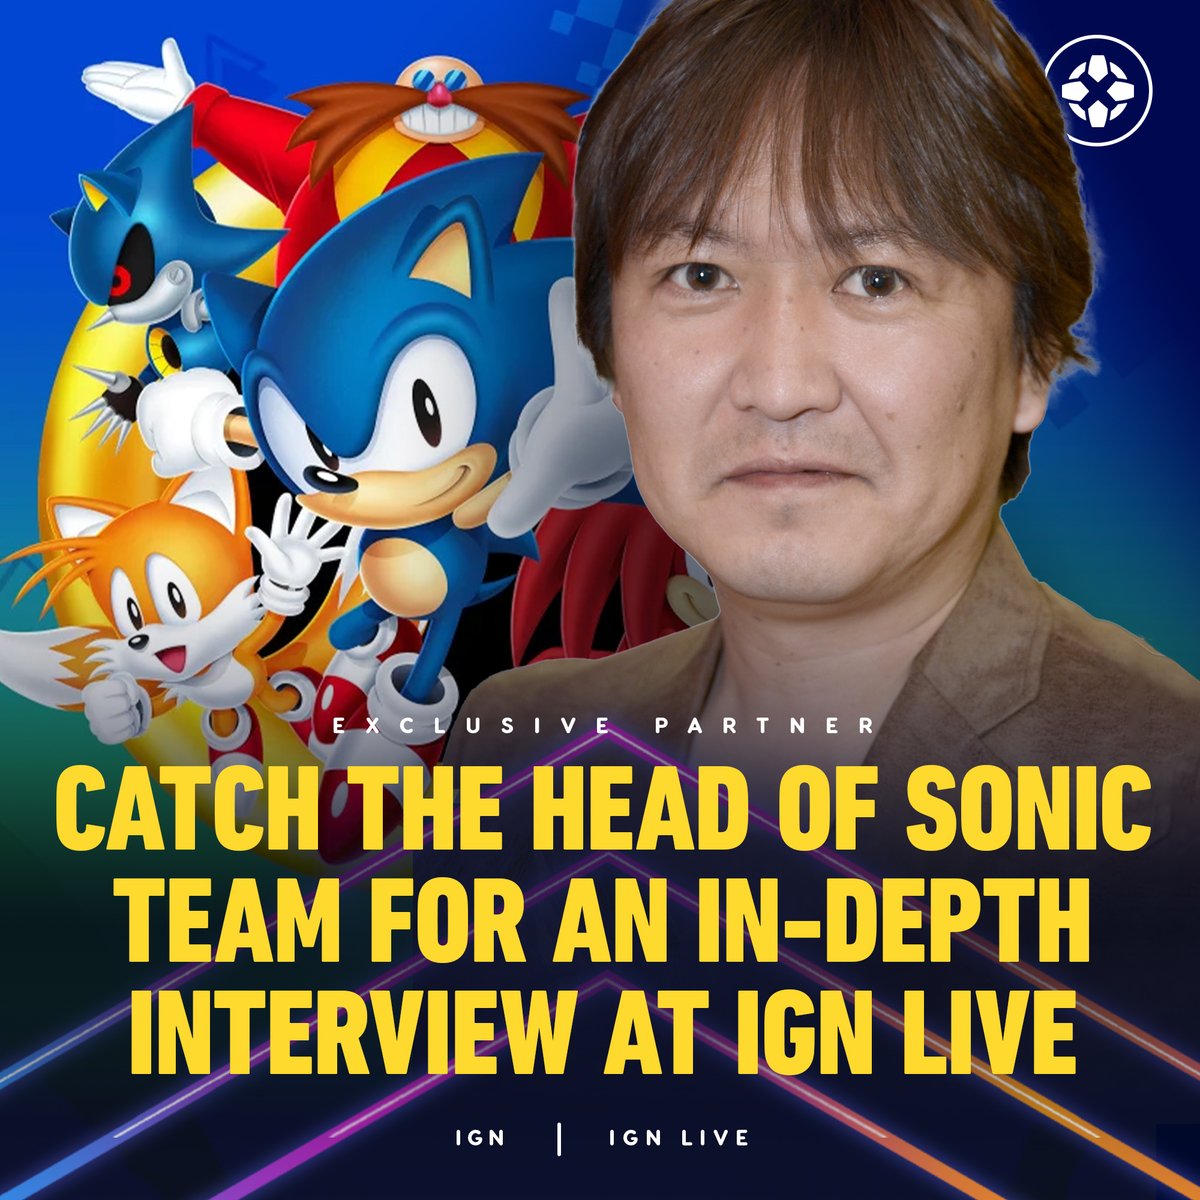 Are you a Sonic fan? If so, you won’t want to miss #IGNLive! The head of Team Sonic (and prolific Sonic the Hedgehog developer) Takashi IIzuka will be on hand to answer all our burning questions at the in-person fan event in LA June 7-9! bit.ly/3UC6XZm